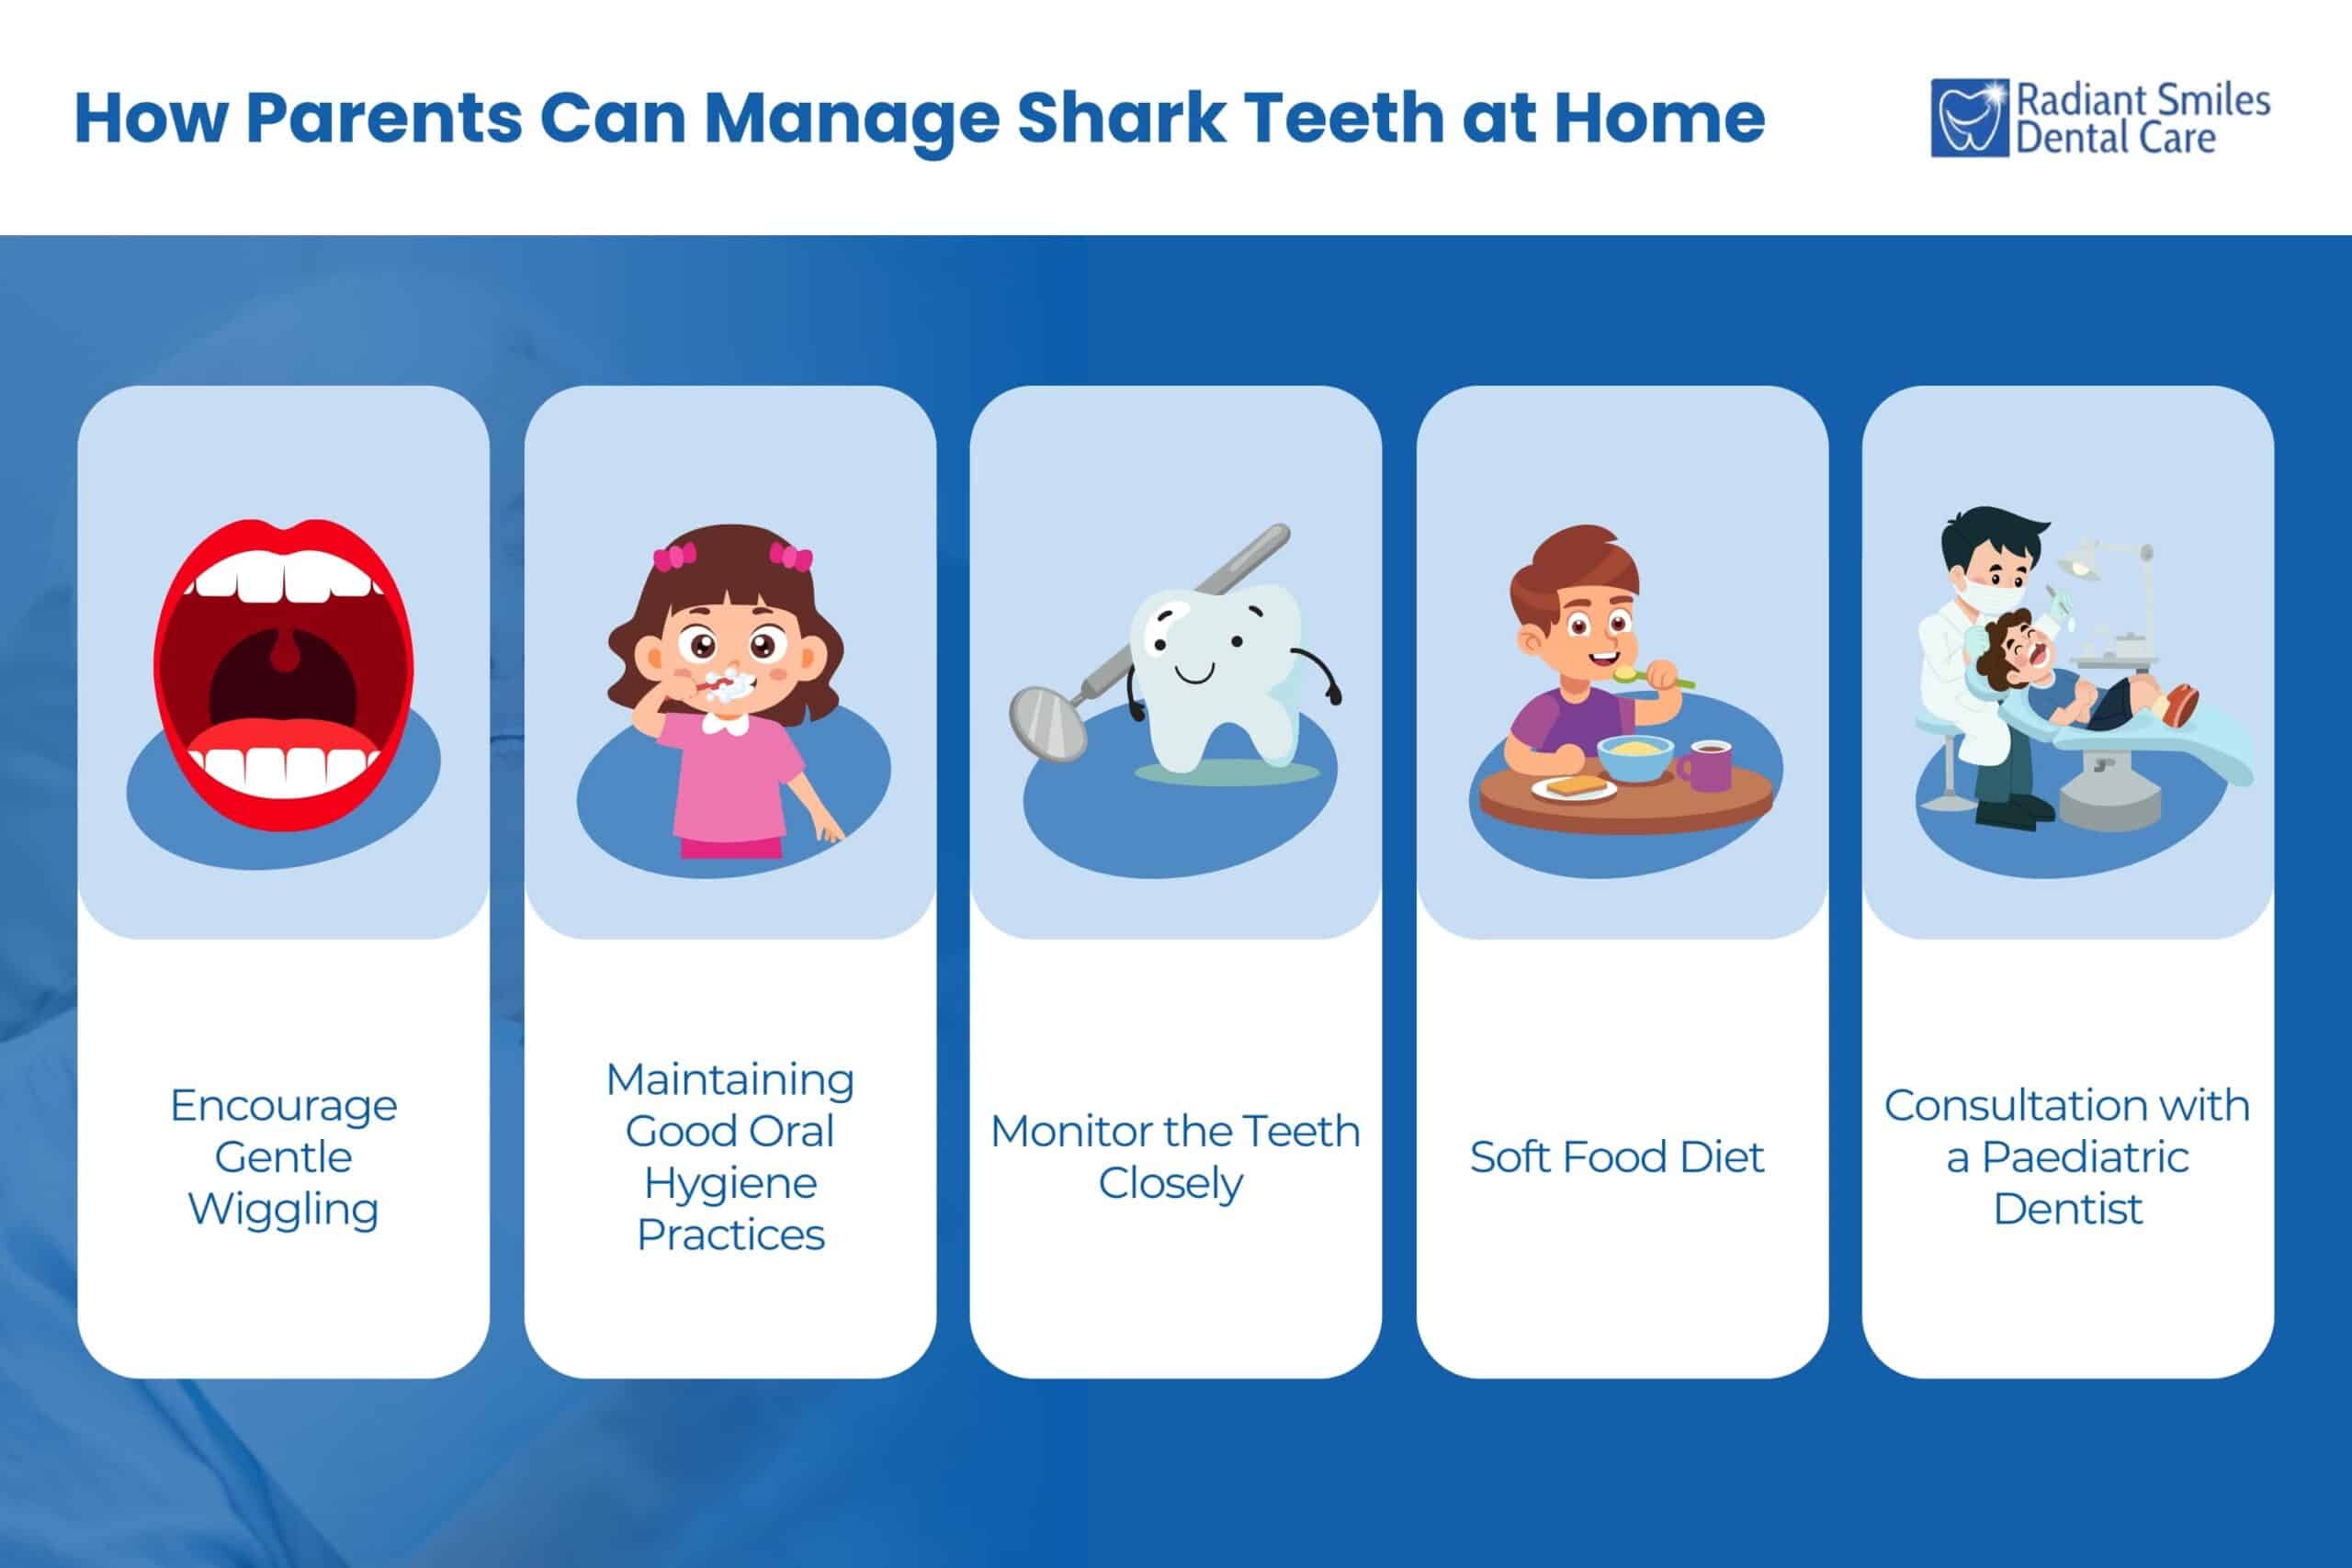 How Parents Can Manage Shark Teeth at Home